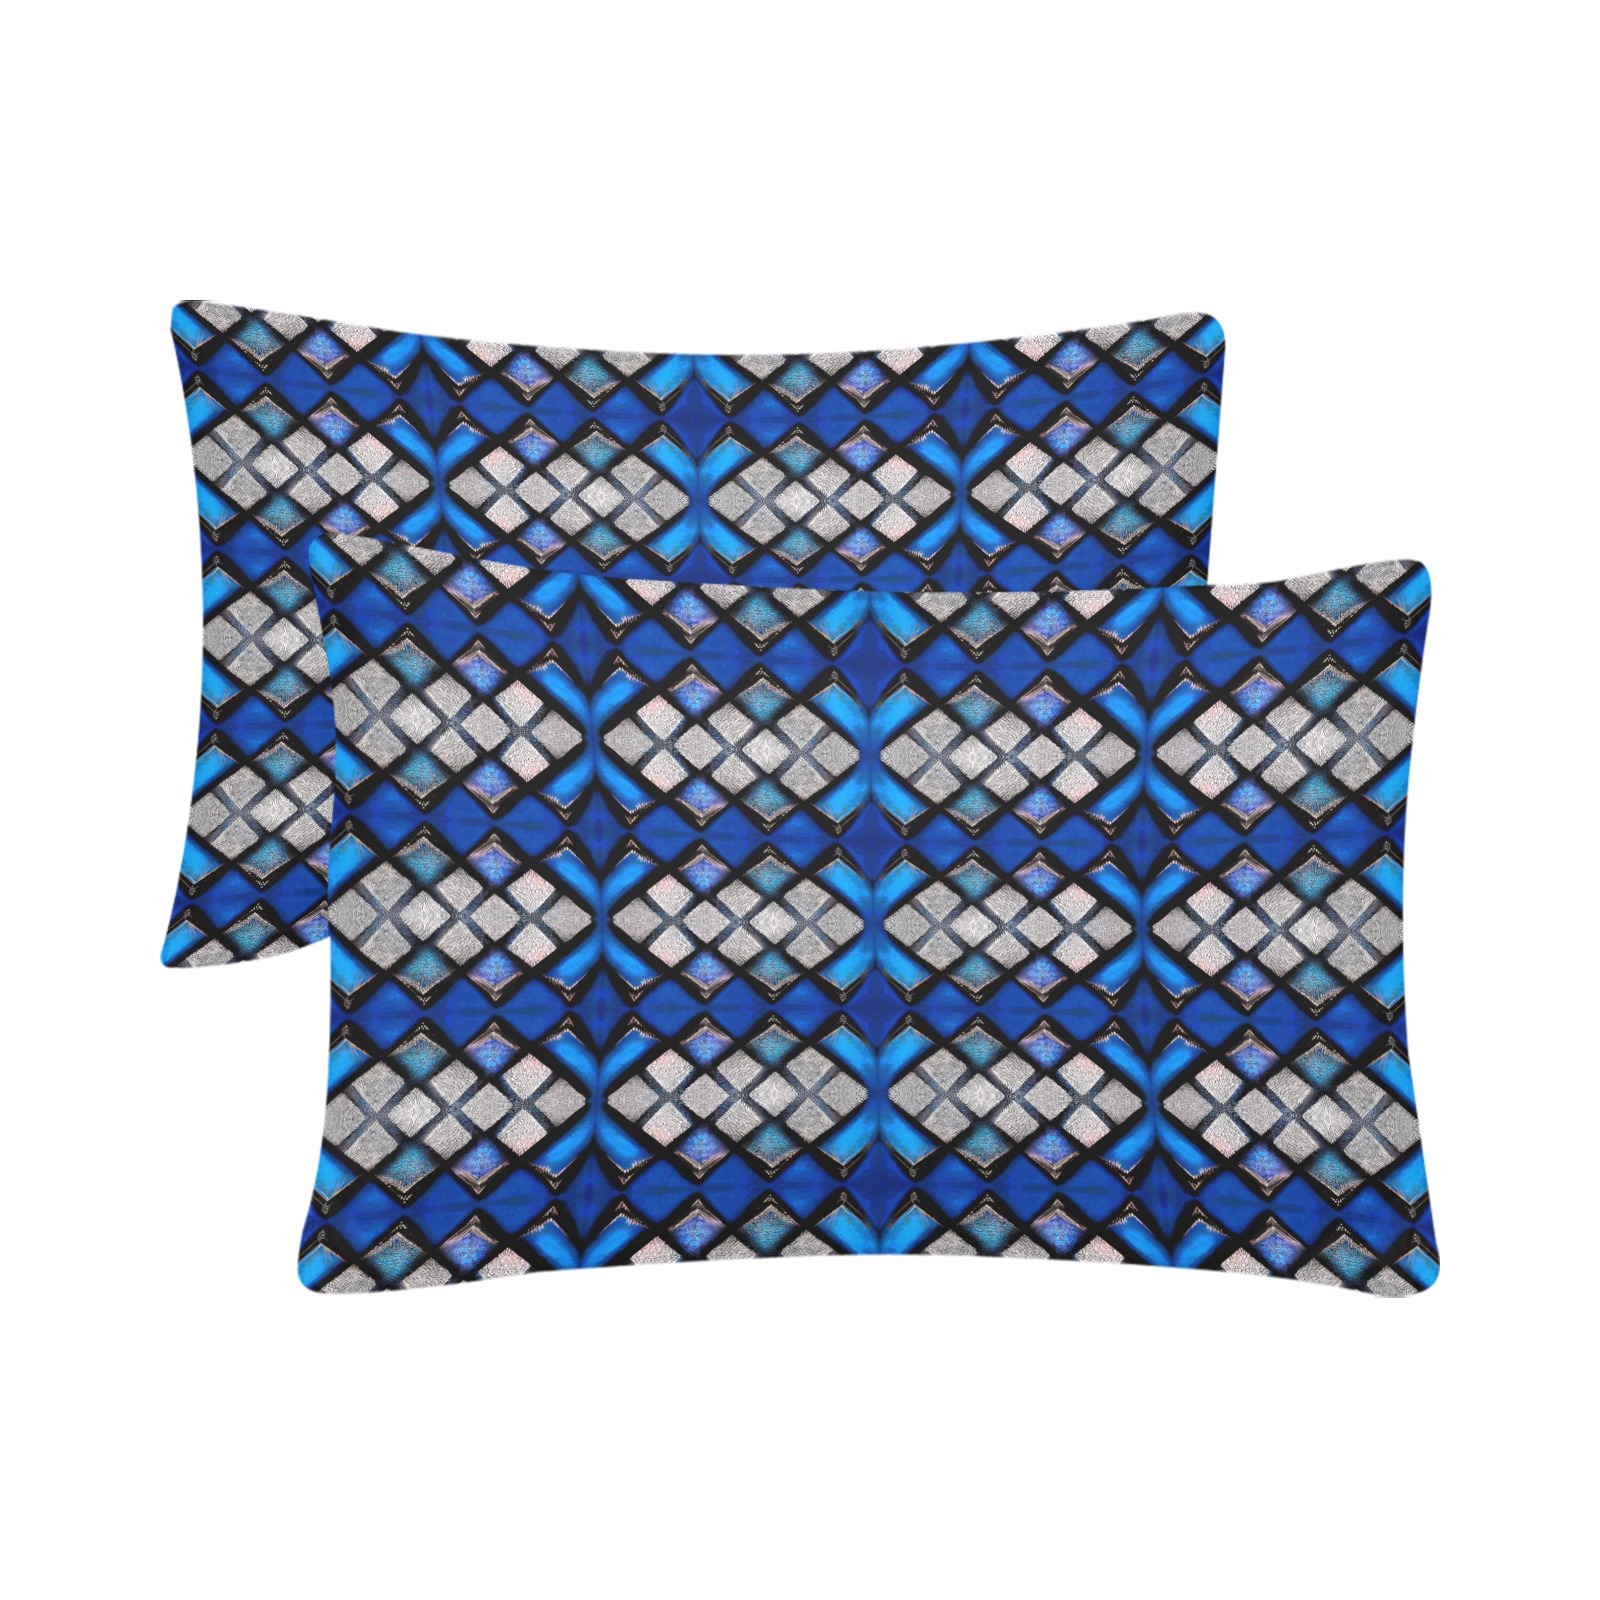 blue and silver repeating pattern Custom Pillow Case 20"x 30" (One Side) (Set of 2)